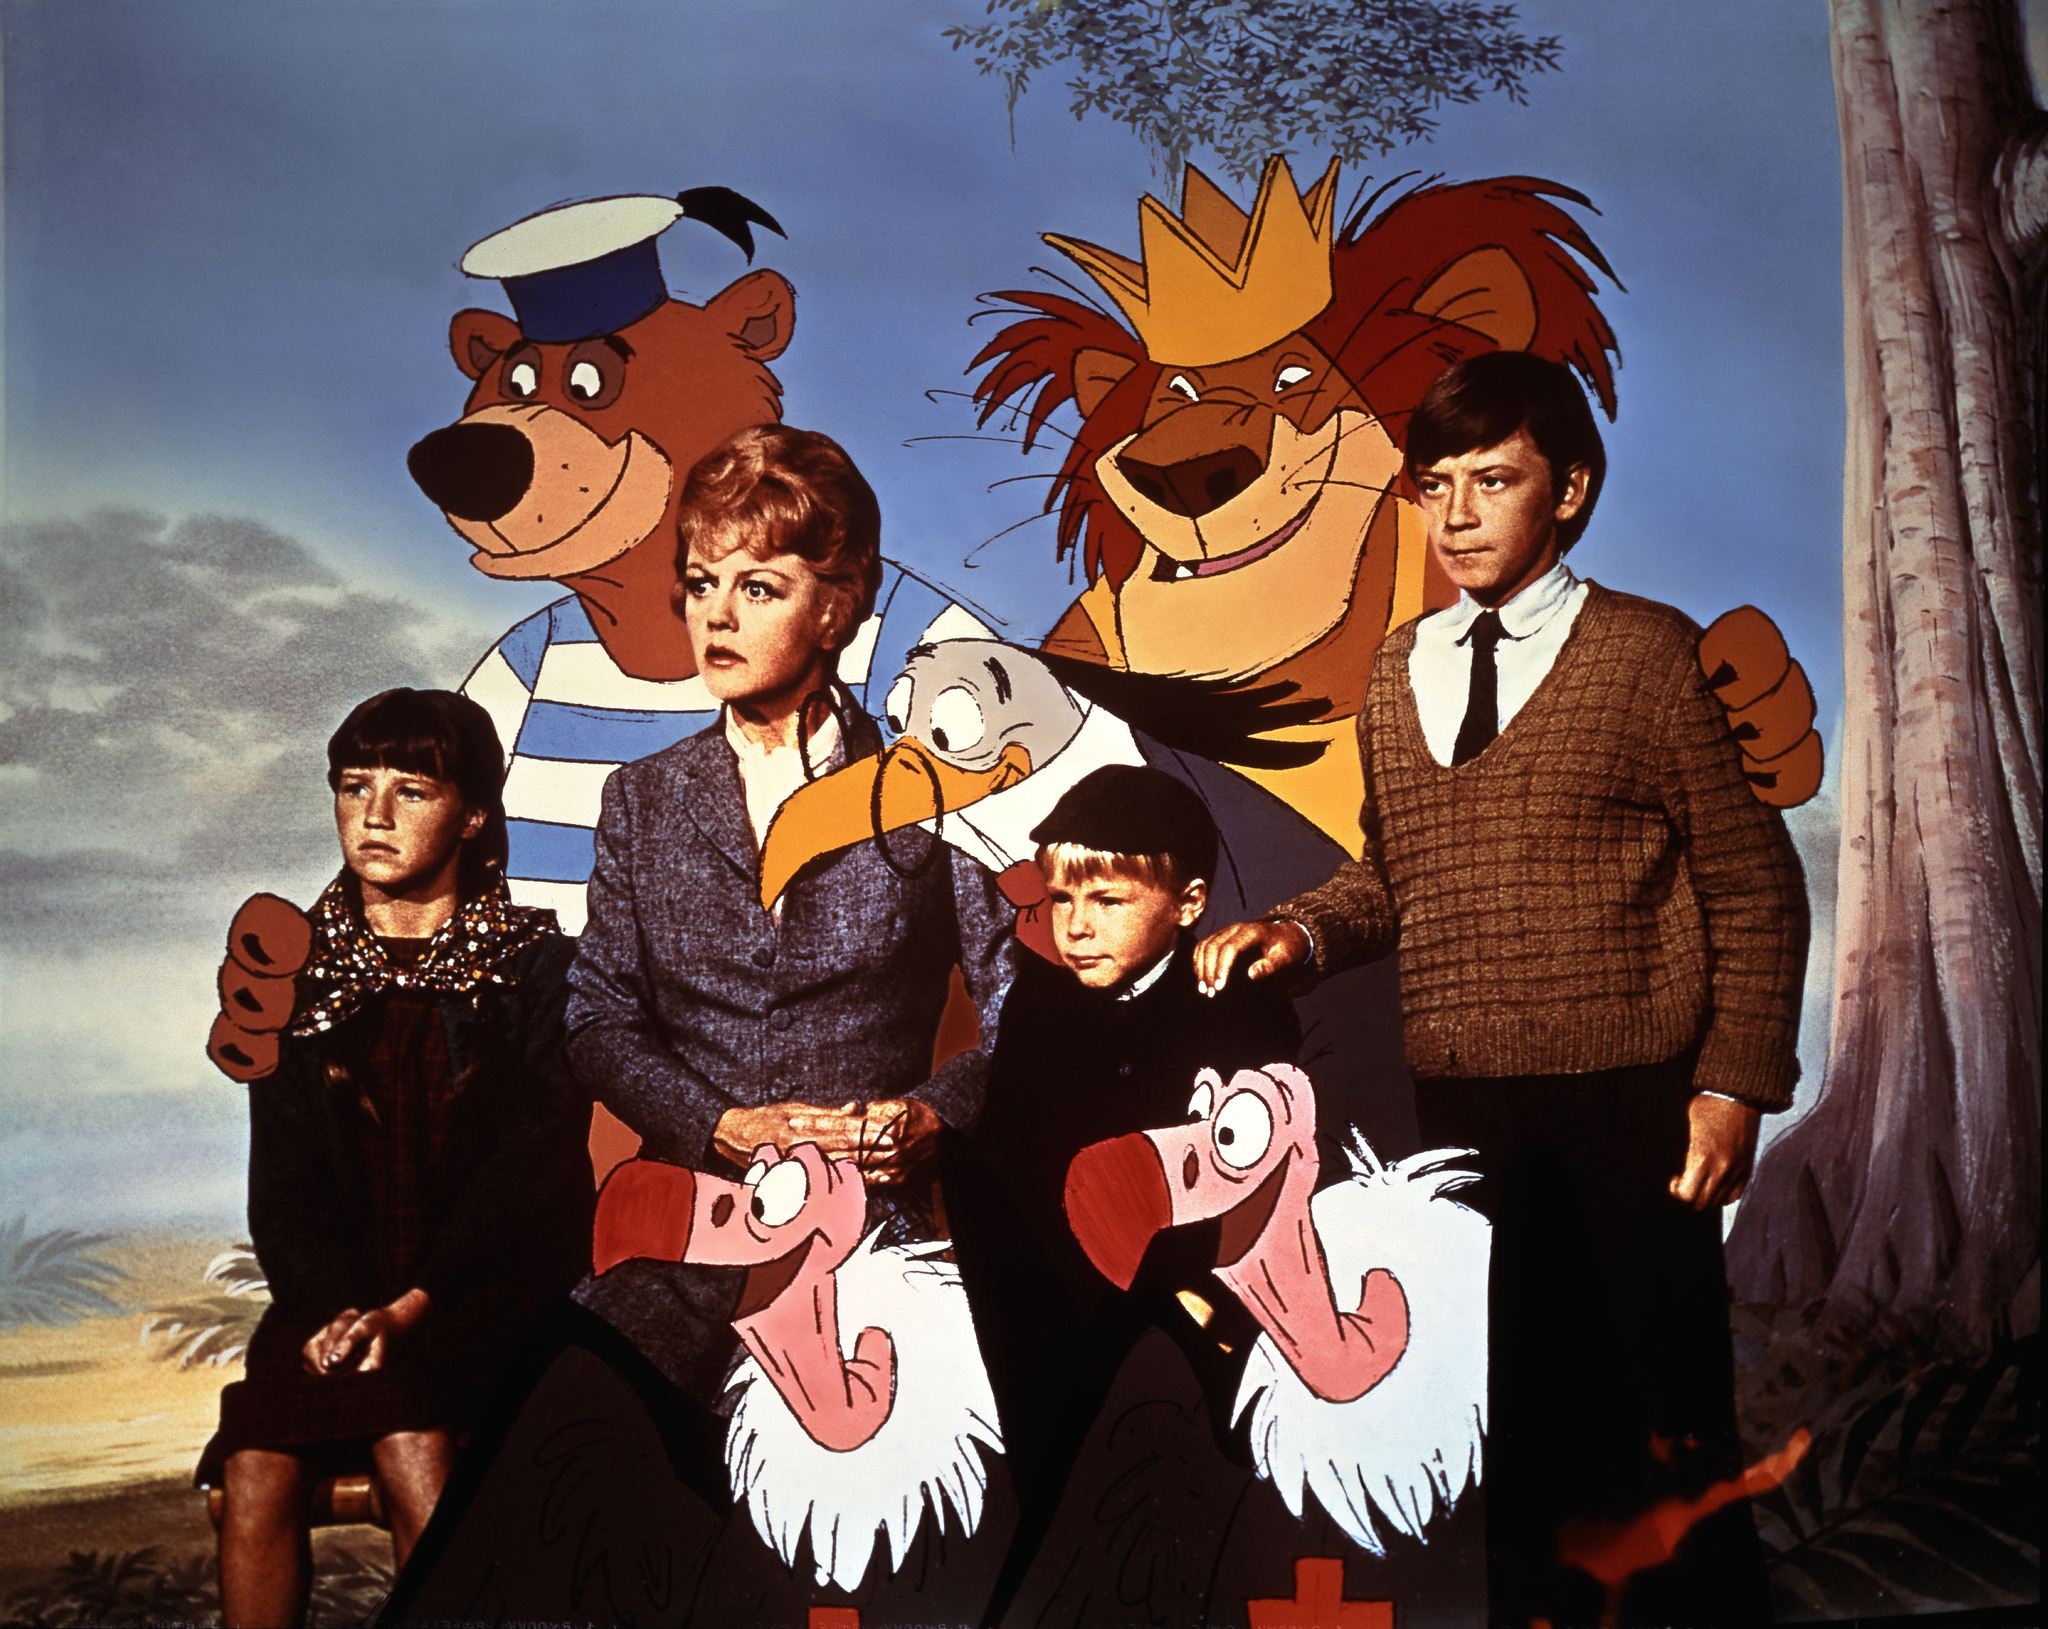 Still of Angela Lansbury in Bedknobs and Broomsticks (1971)